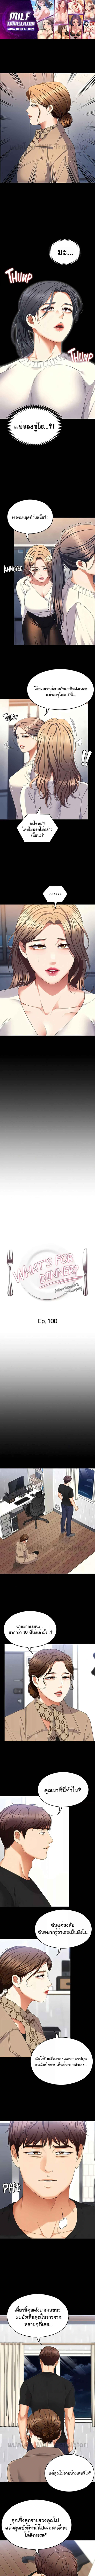 Tonight, You’re My Dinner 100 1